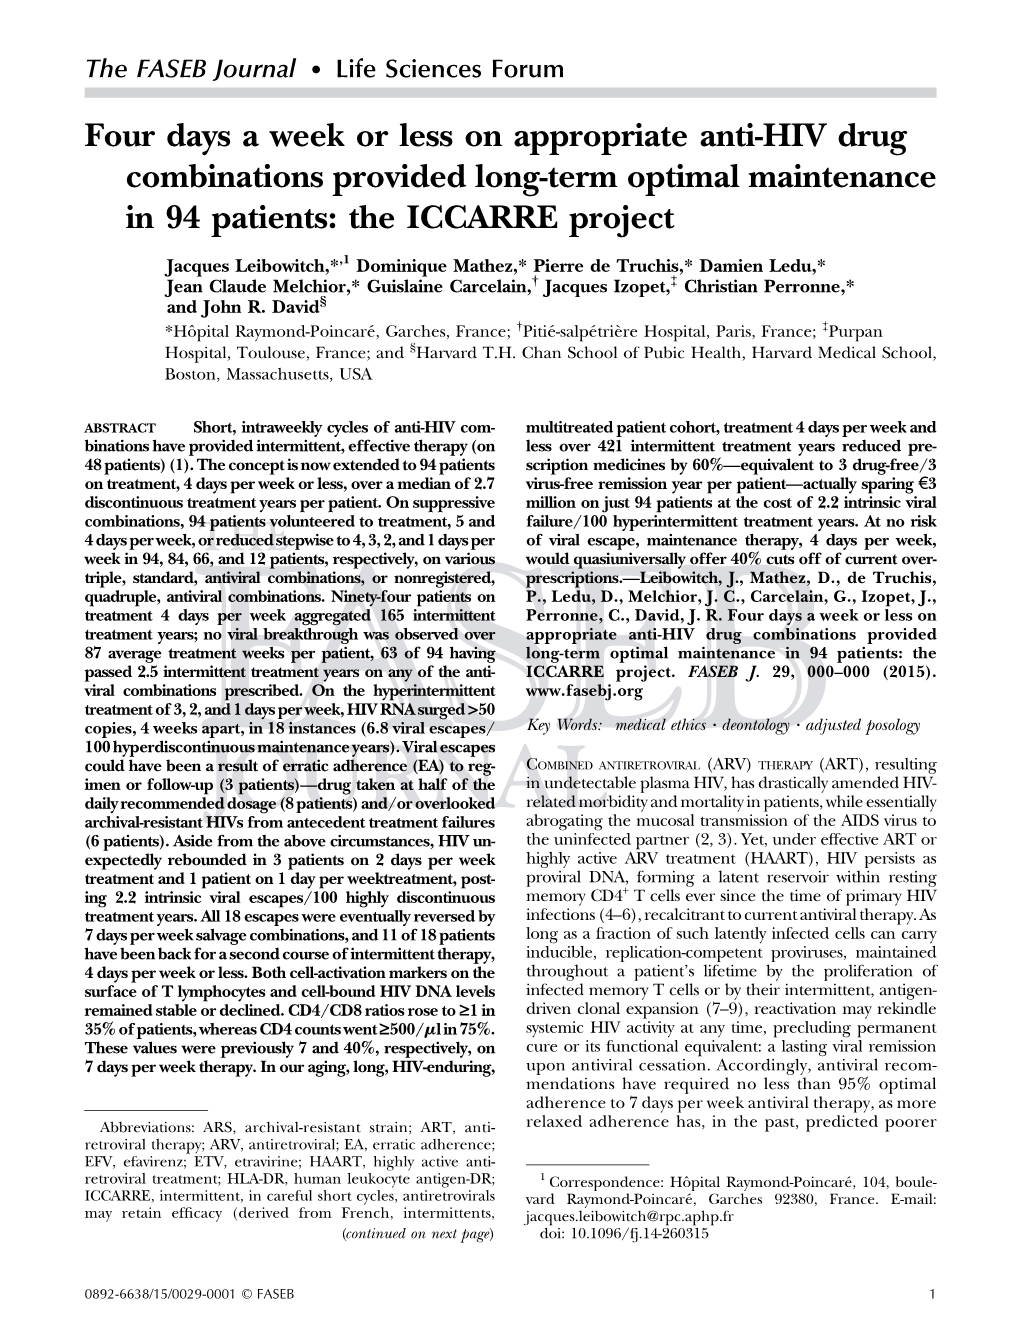 Four Days a Week Or Less on Appropriate Anti-HIV Drug Combinations Provided Long-Term Optimal Maintenance in 94 Patients: the ICCARRE Project